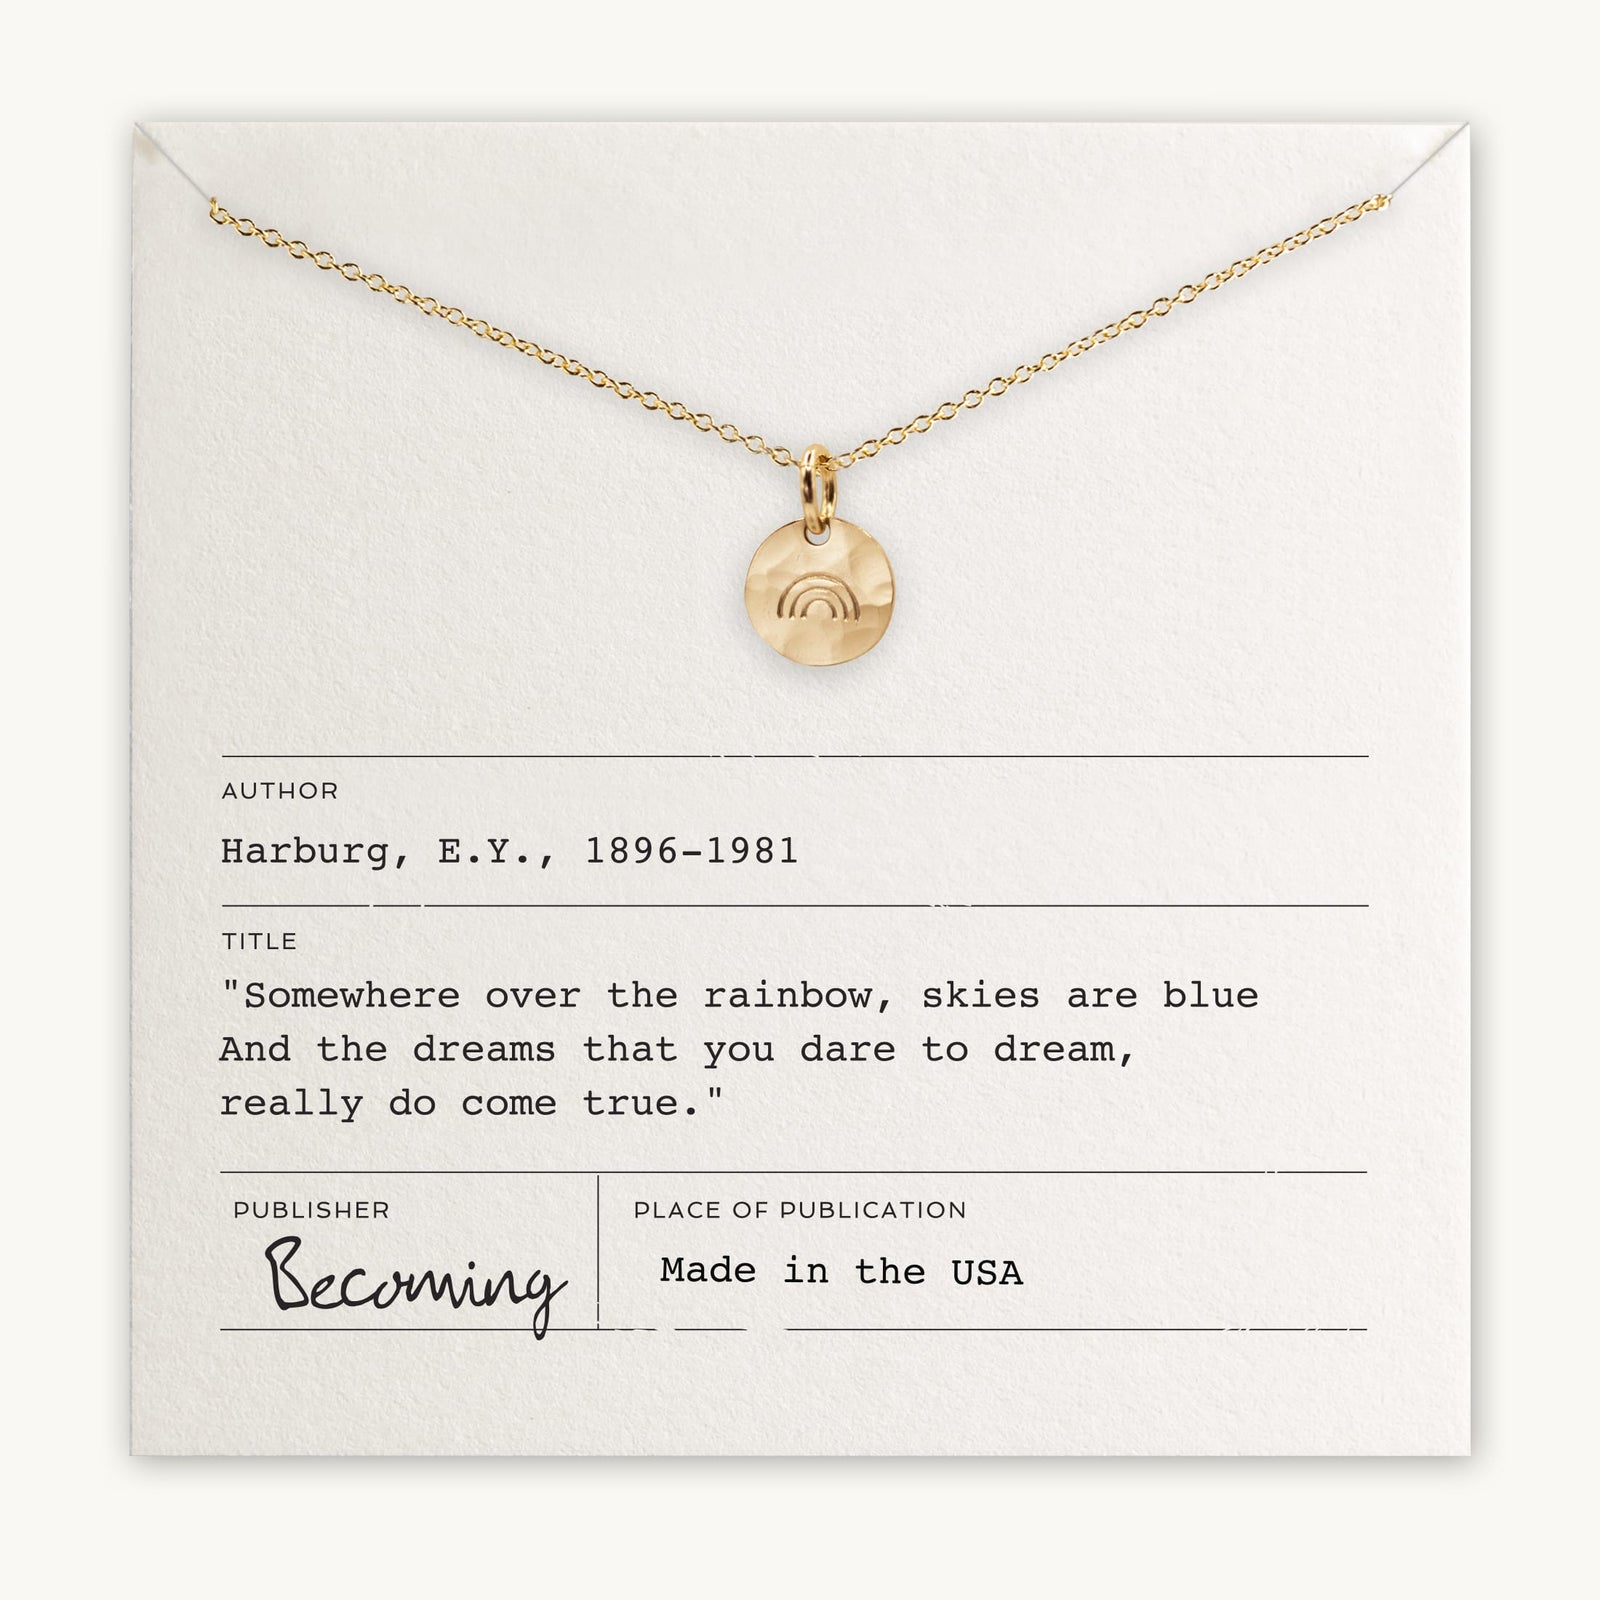 Becoming Jewelry's Over the Rainbow Necklace displayed on a card with an inspirational quote 